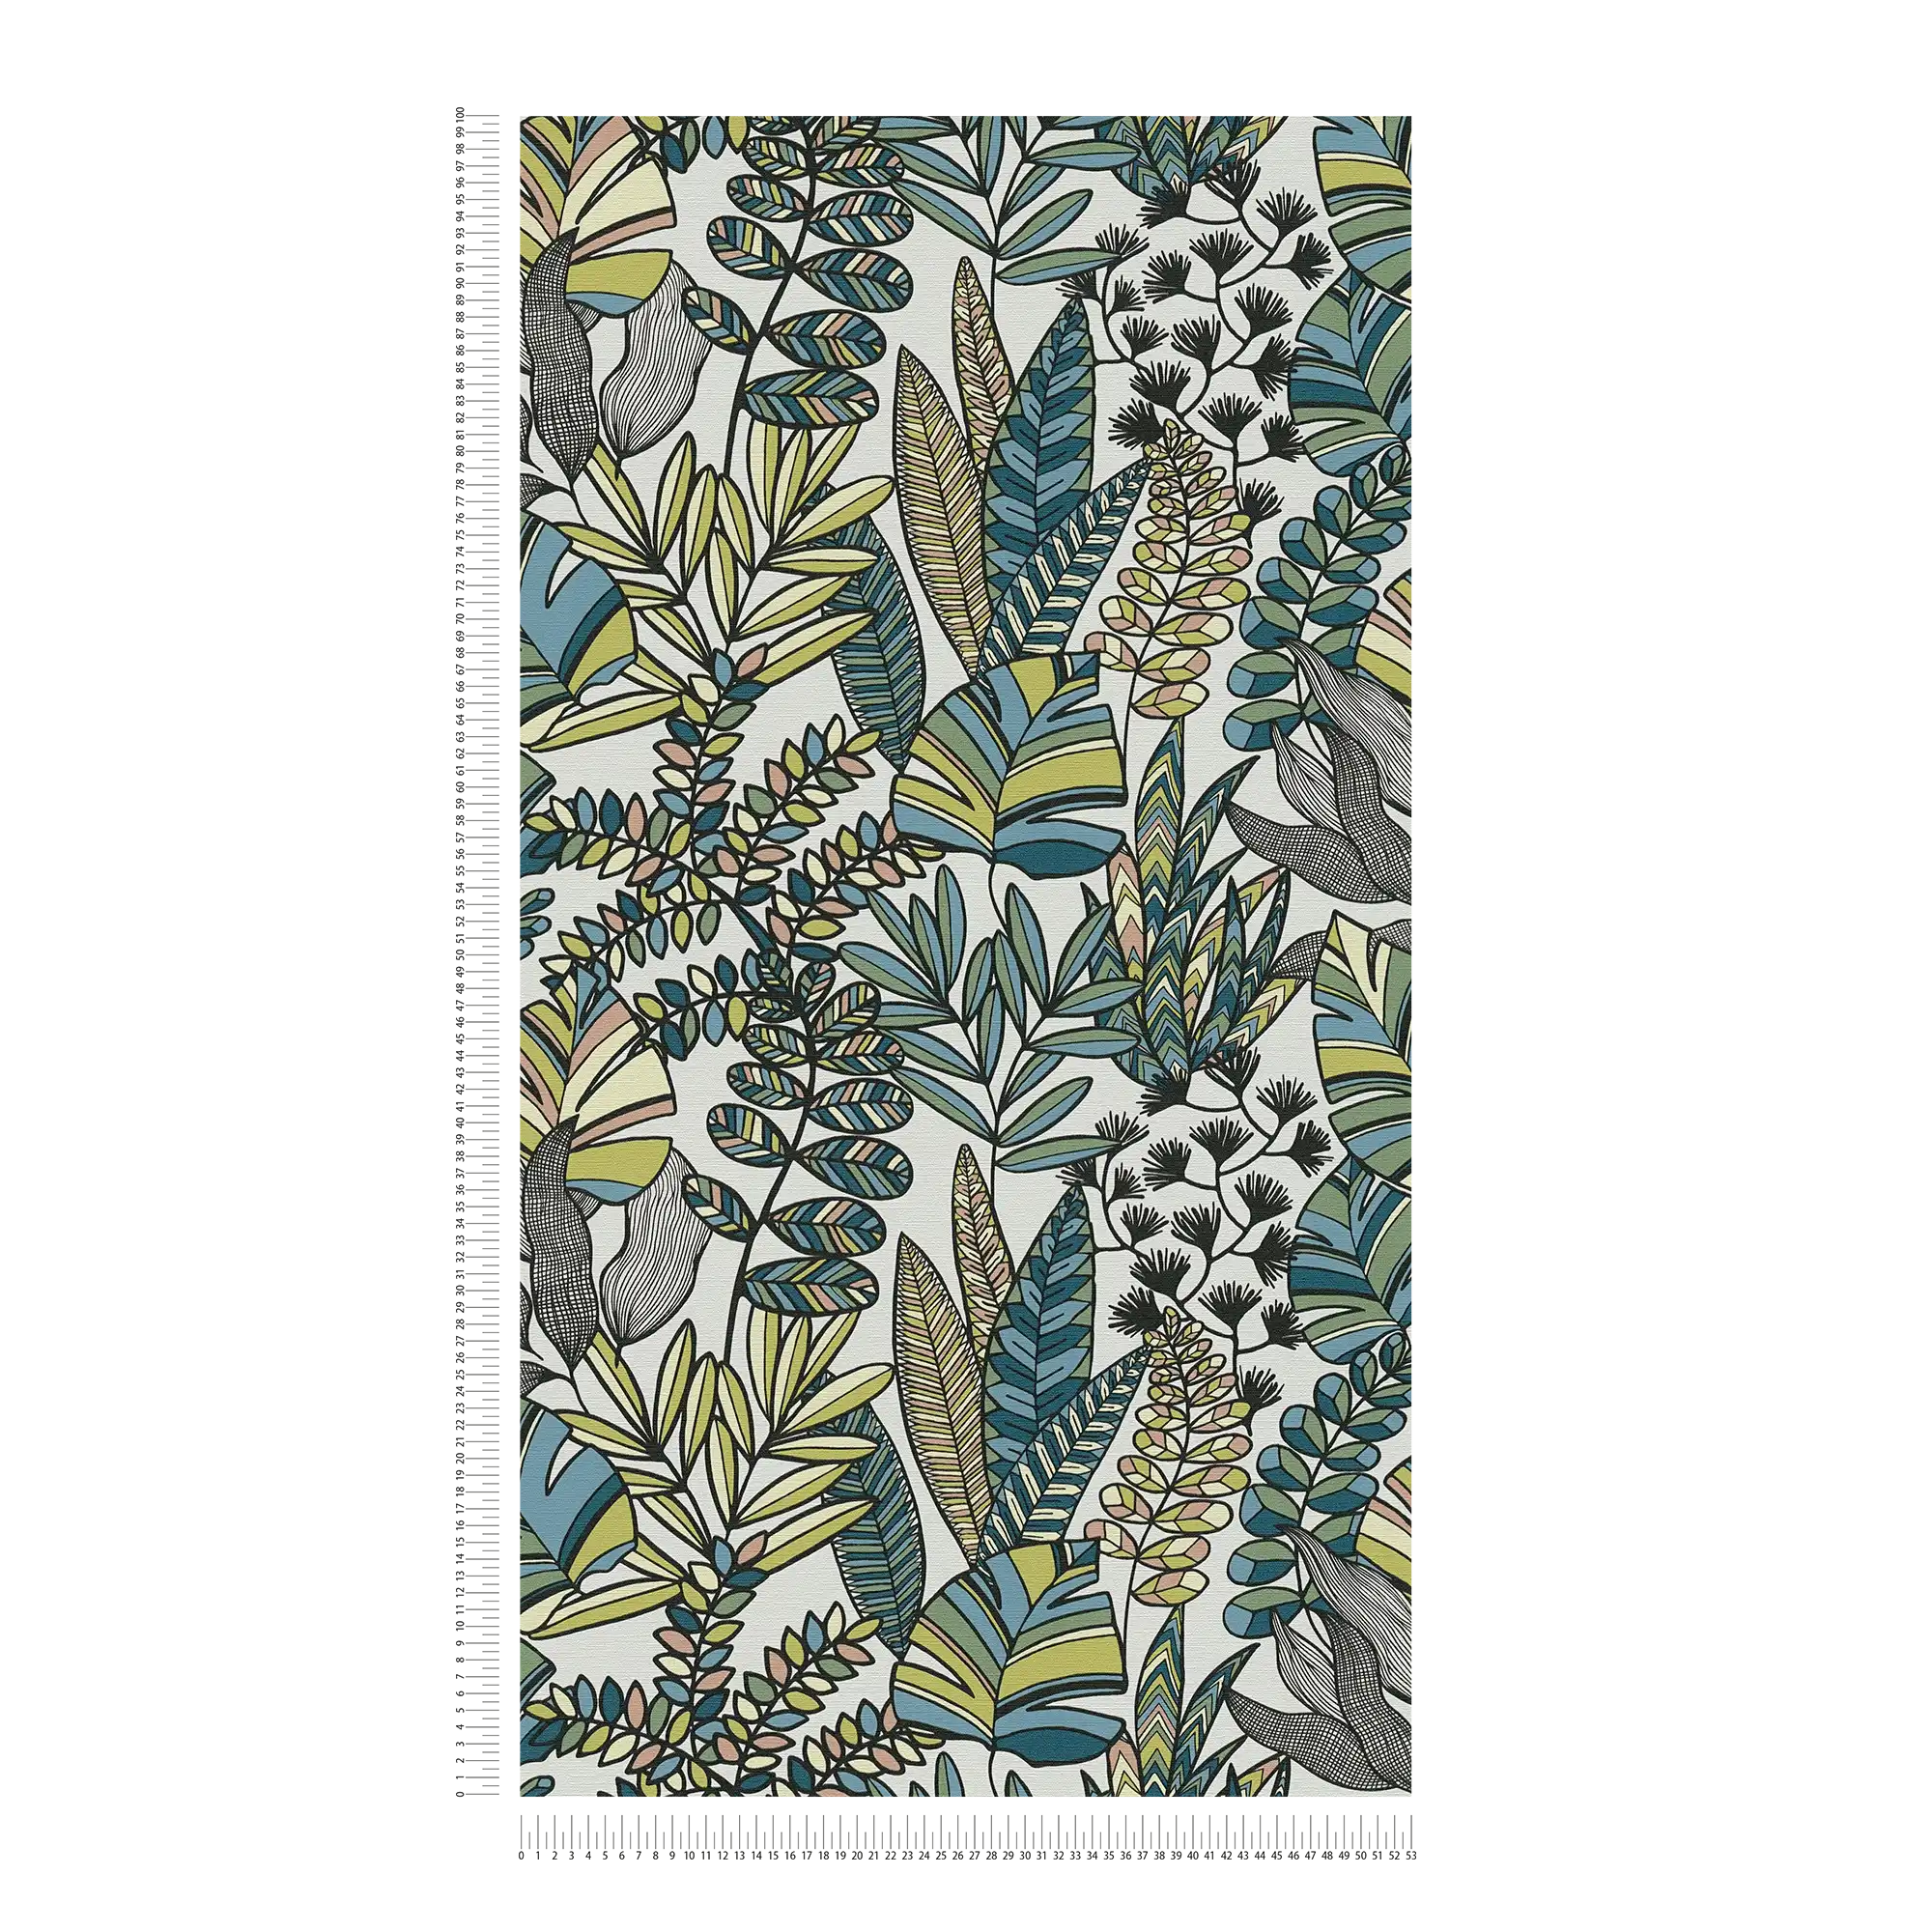             Non-woven wallpaper with large leaves in bold colours - white, black, blue
        